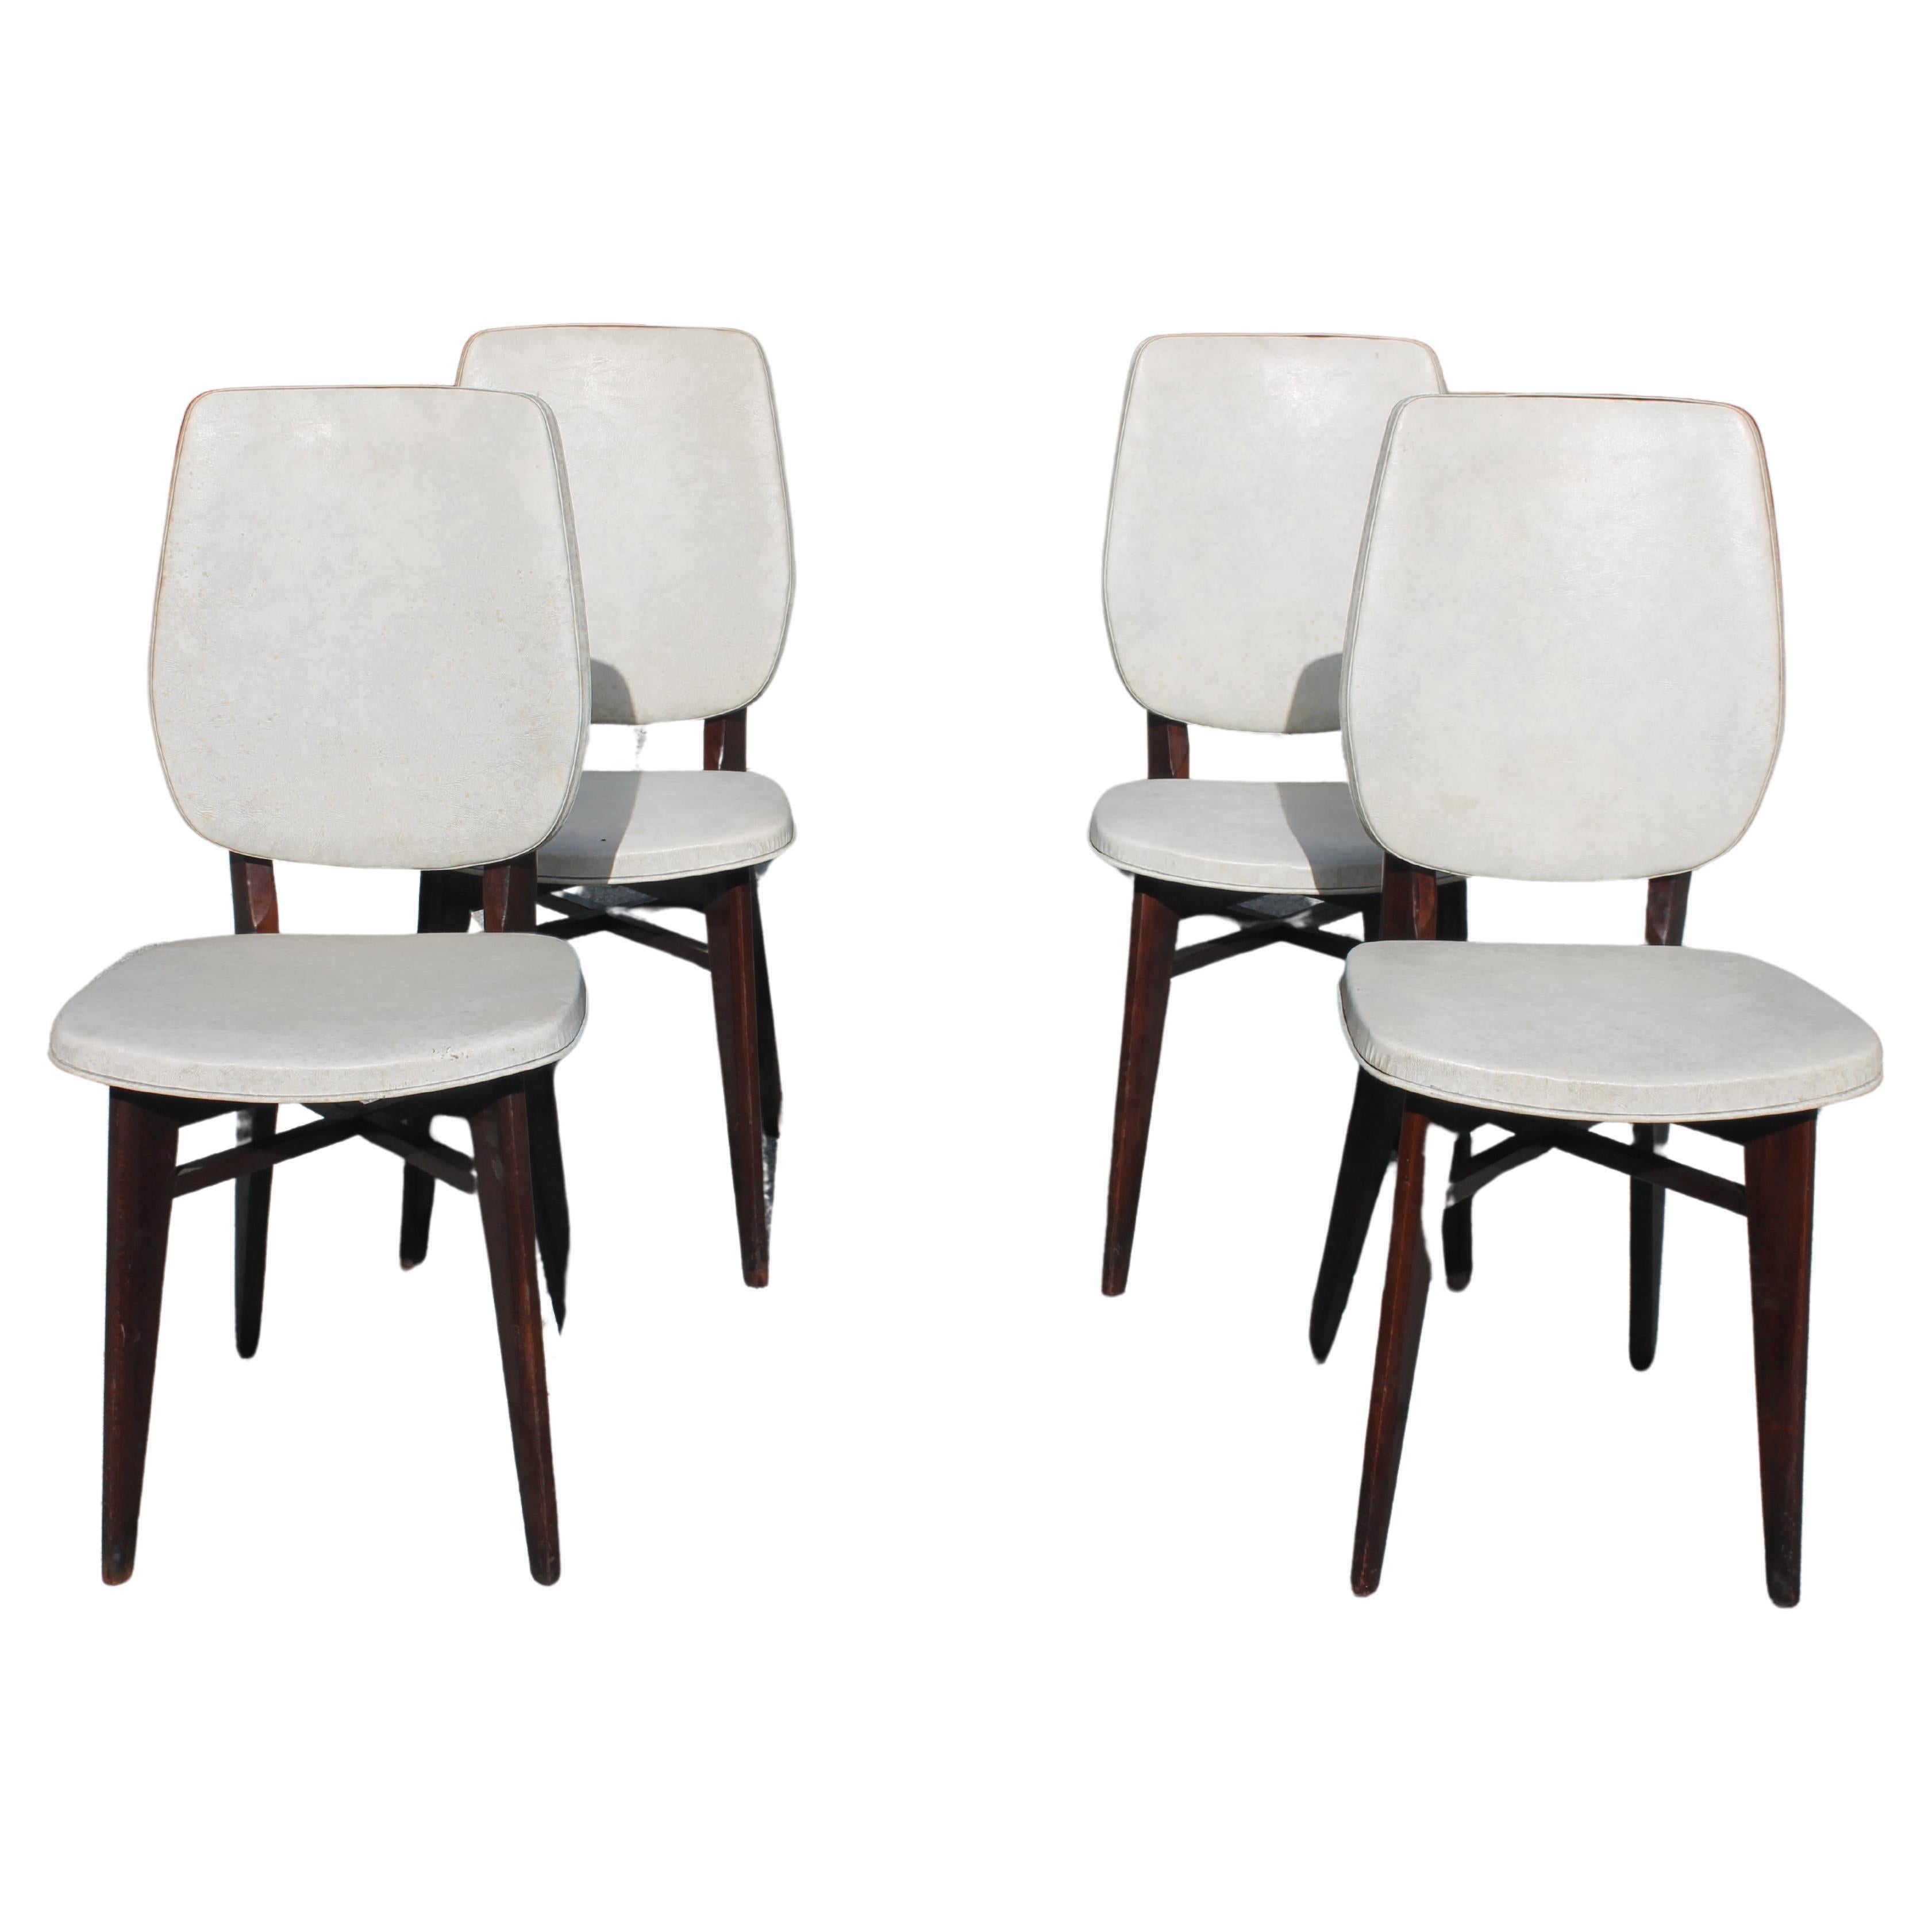 1960's Mid Century Modern Set of 4 French Modern Dining Chairs For Sale